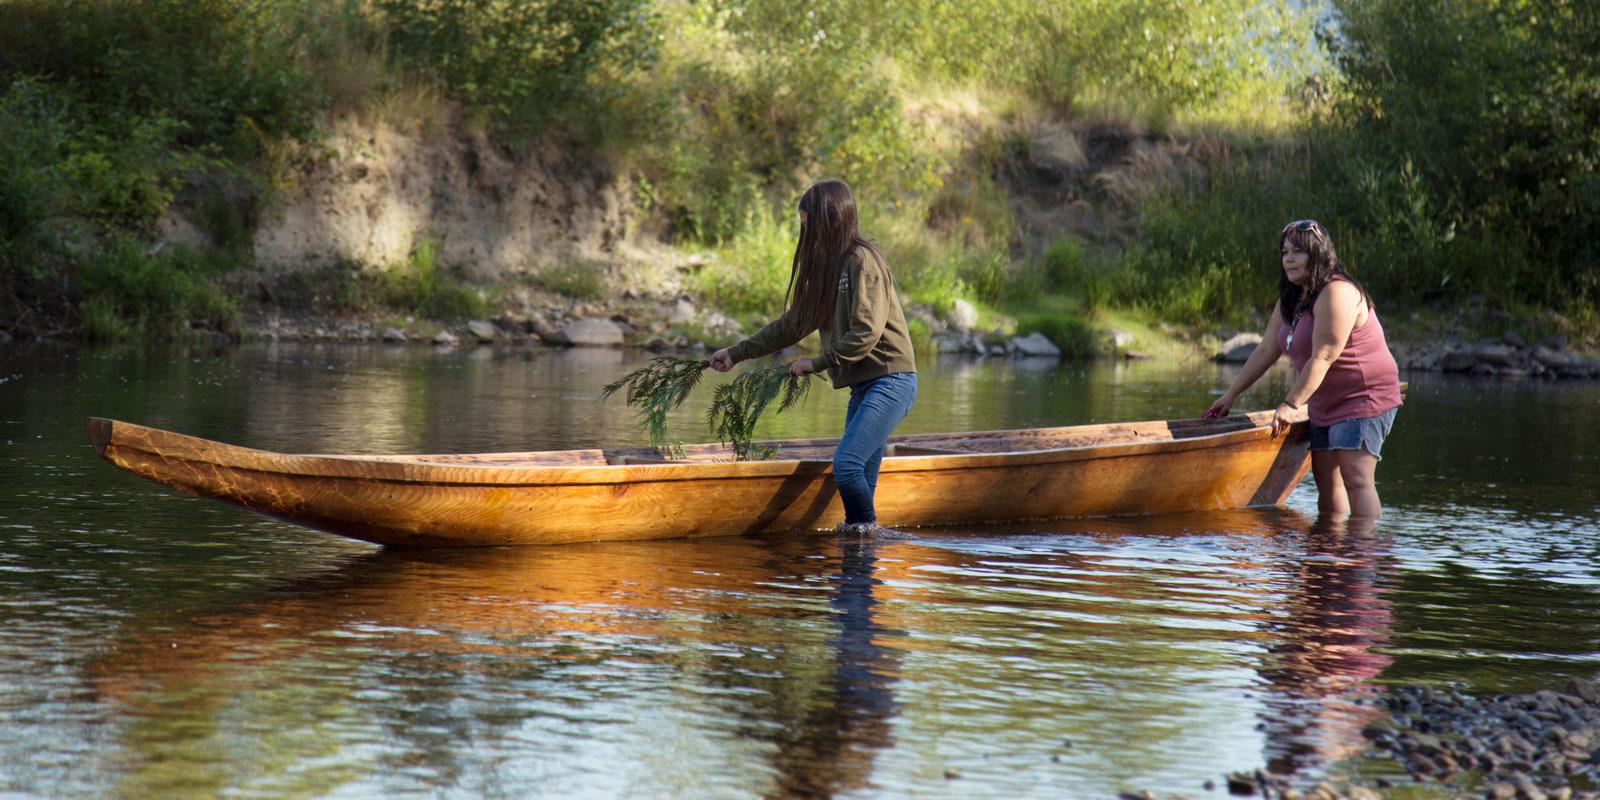 two women carry cedar branches as they push out a wooden carved canoe onto the water